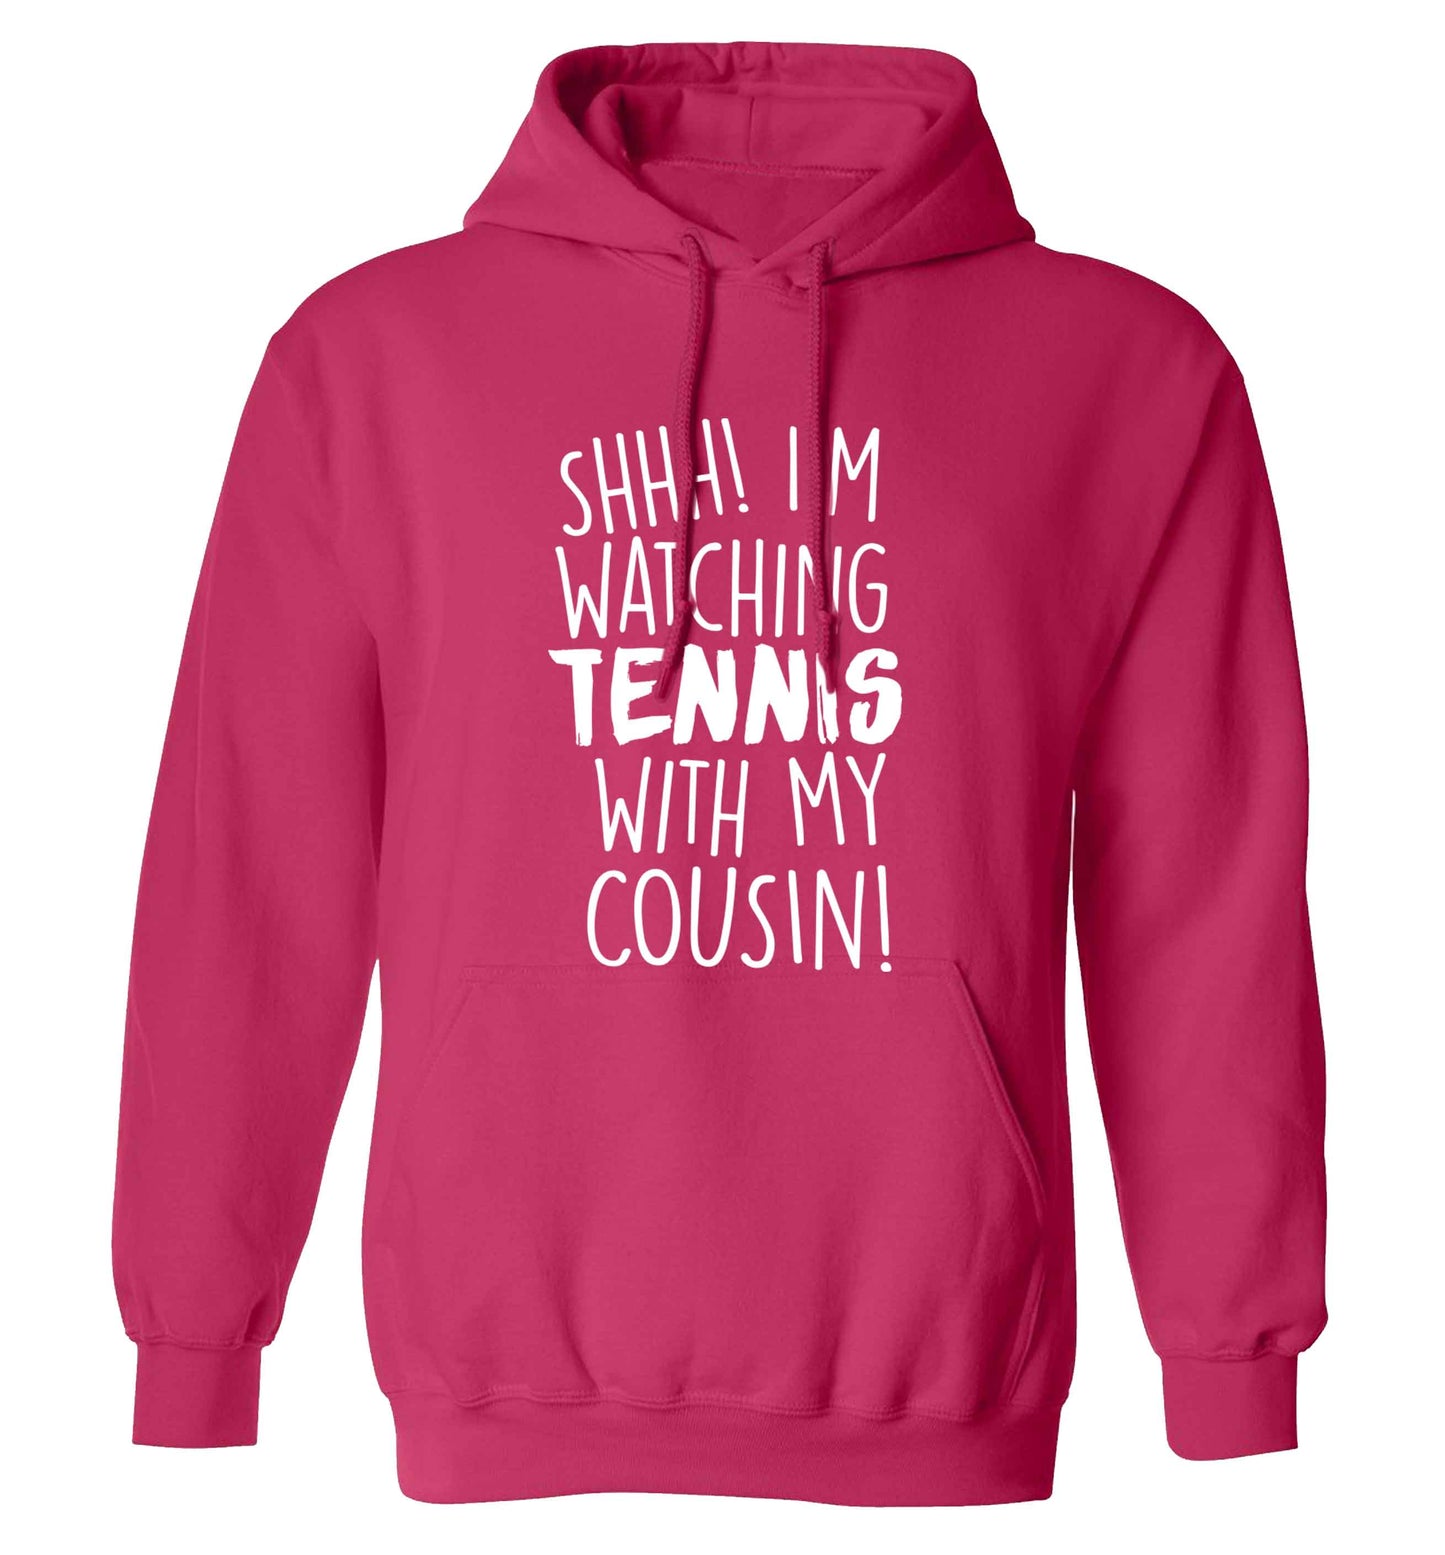 Shh! I'm watching tennis with my cousin! adults unisex pink hoodie 2XL